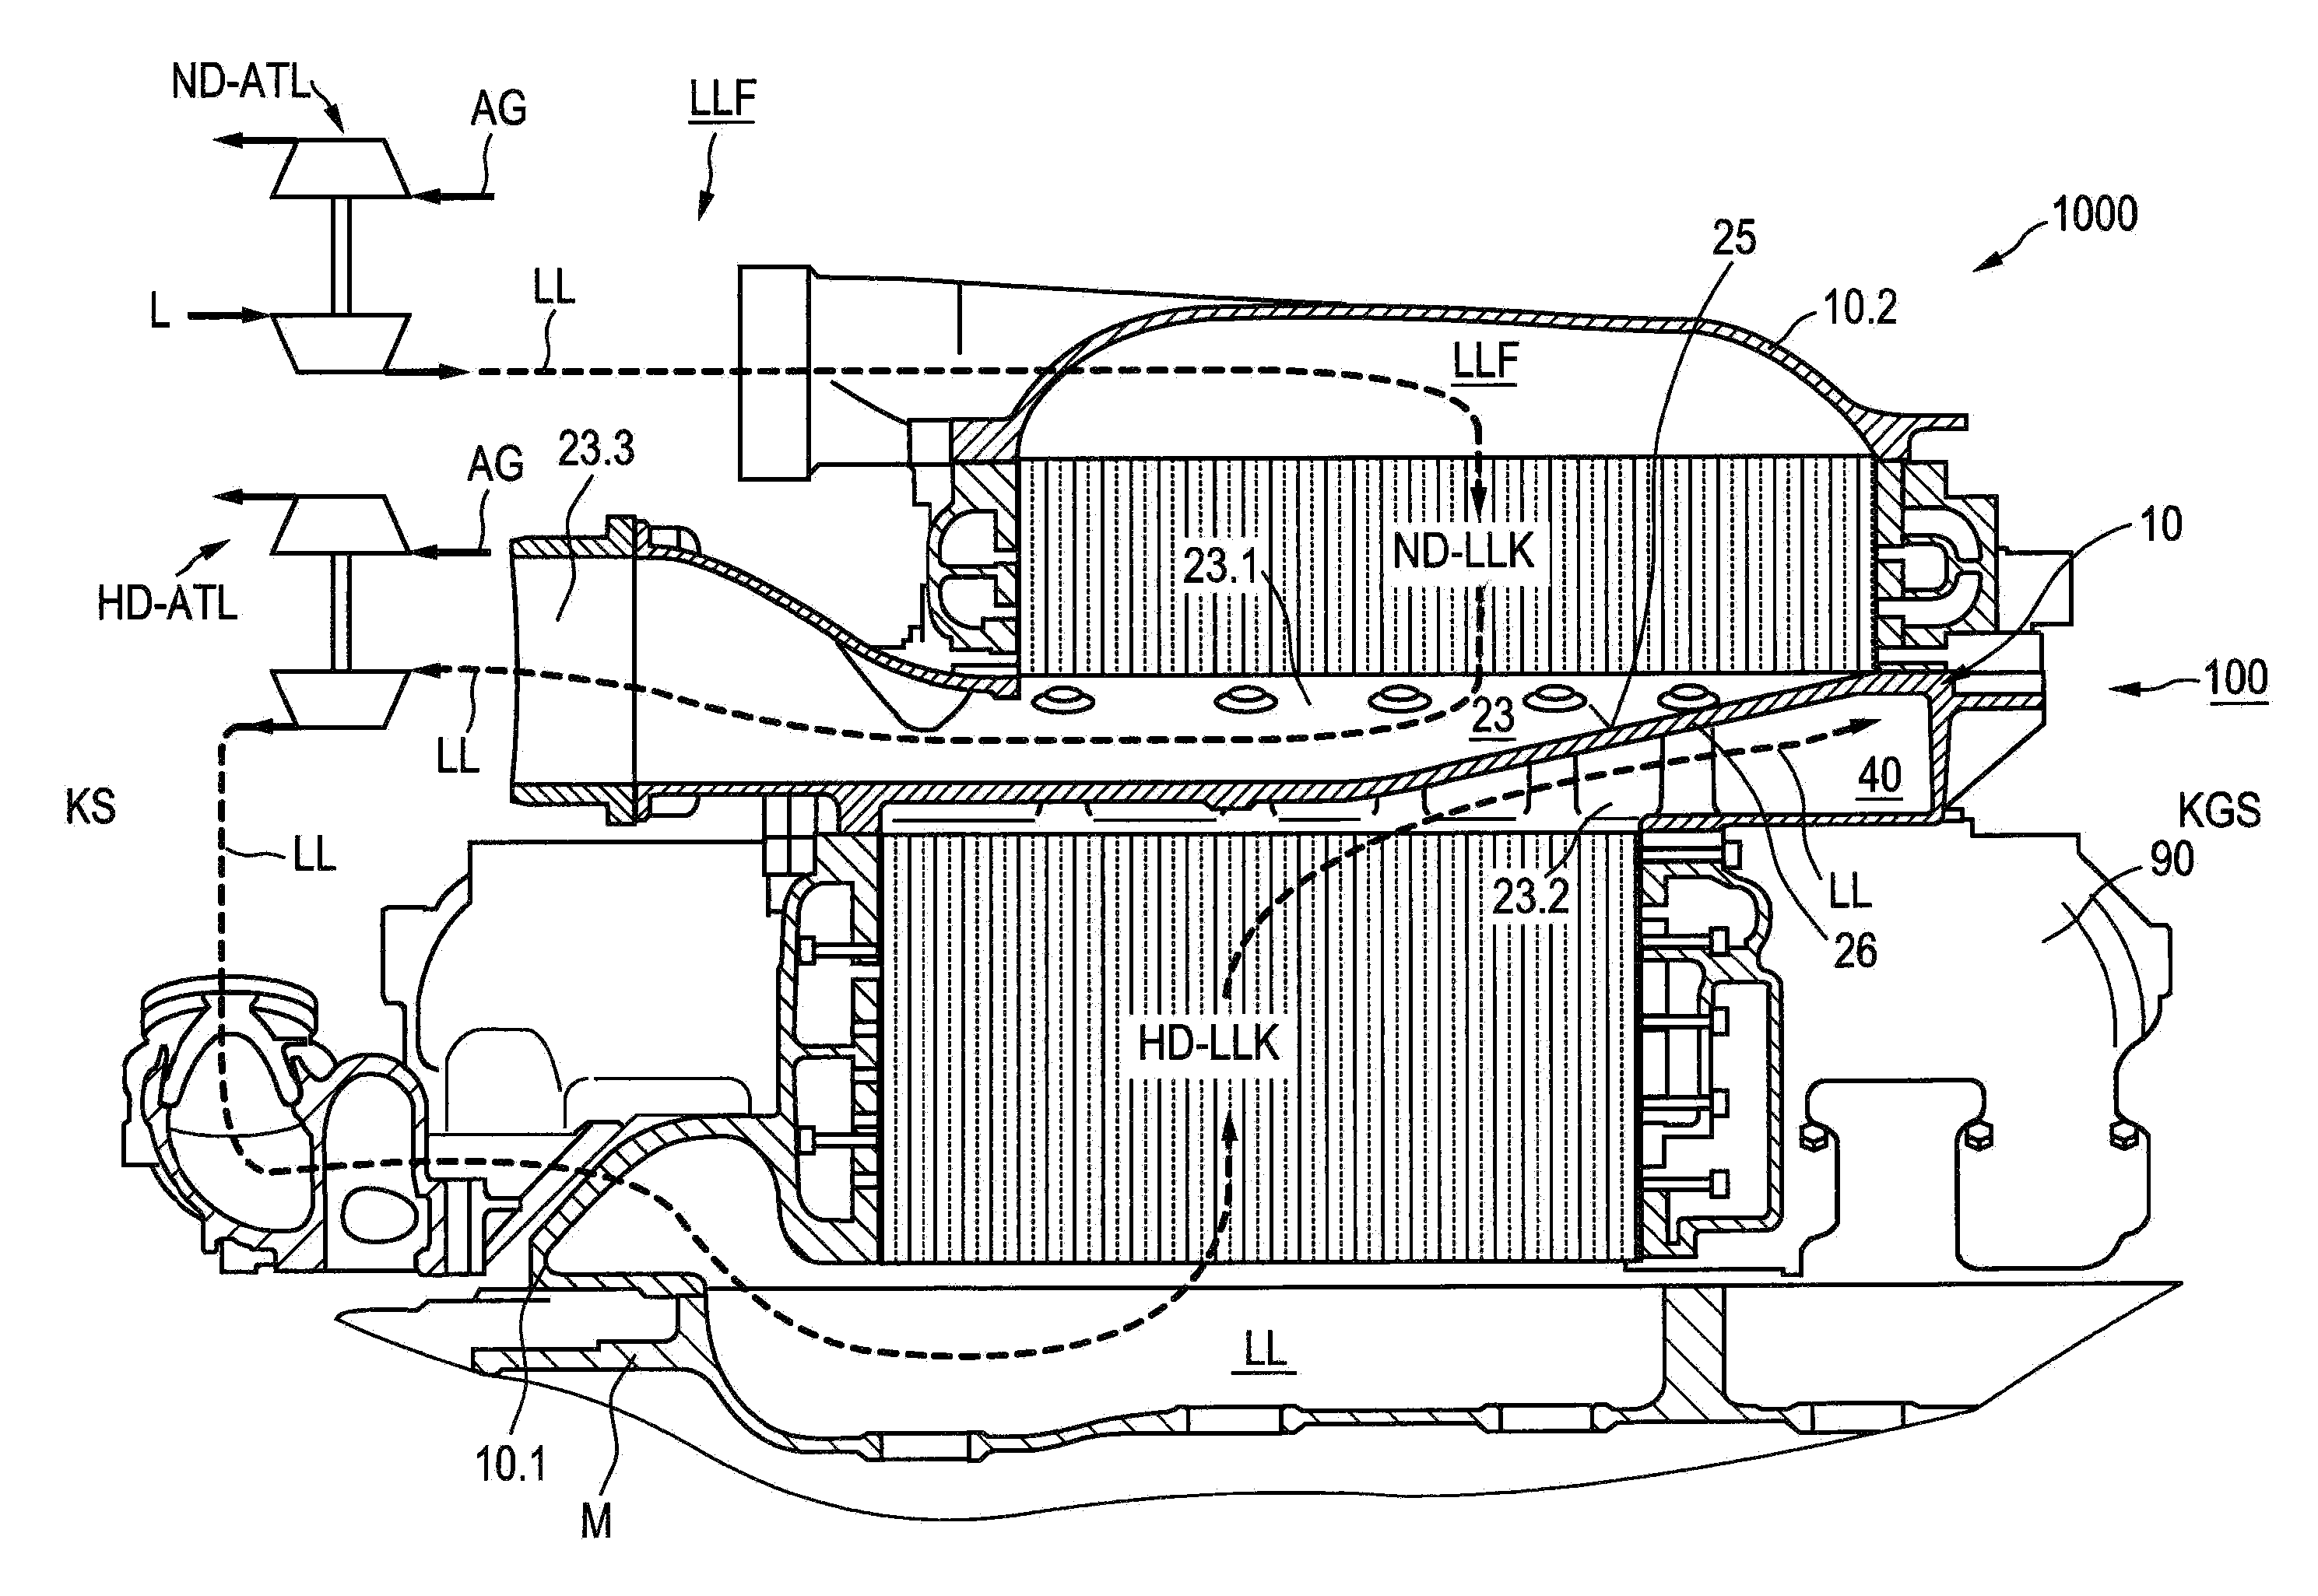 Connection box with charging fluid supply arrangement for an internal combustion engine